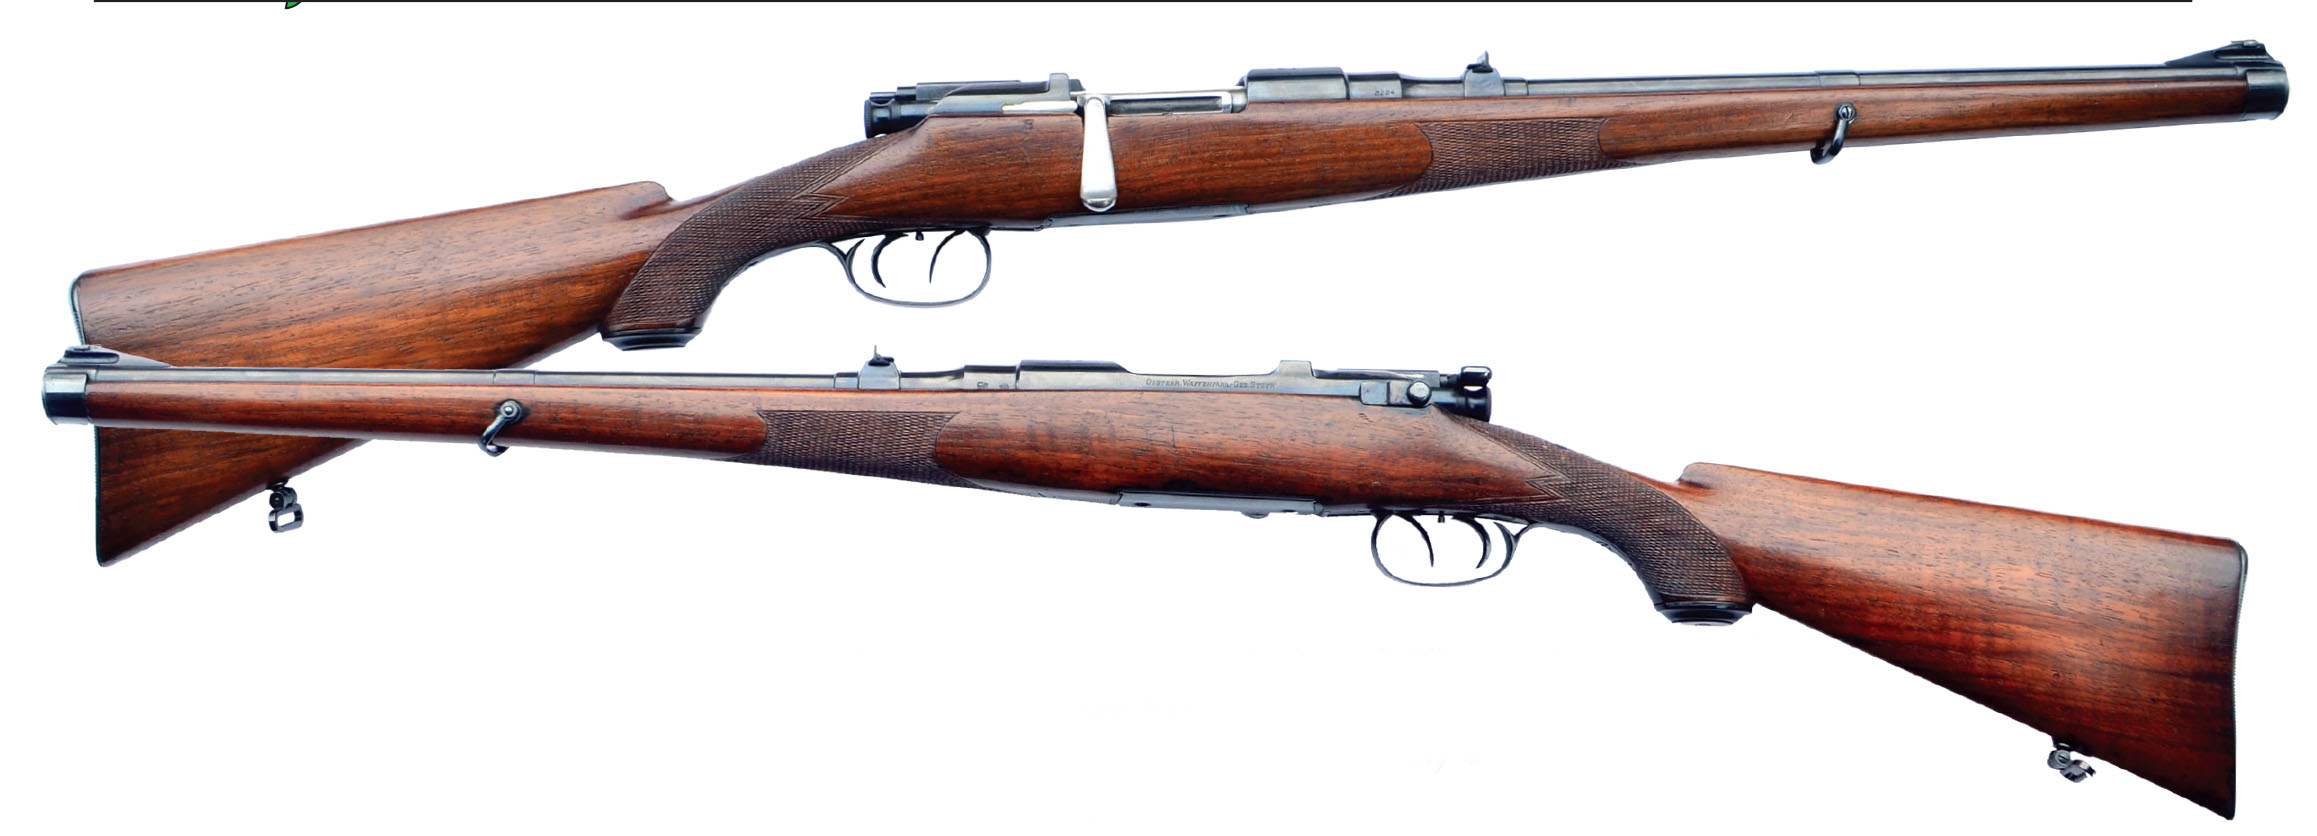 A Mannlicher-Schönauer Model 1905. This rifle is not all original: the bolt and rifle serial numbers don’t match, the barrel is 17.7 inches long rather than the usual 20 inches, the bolt is polished, not blued, and the stock has no cheekpiece. Still, it is undoubtedly a Mannlicher with all the handy qualities and fine workmanship the name carries.